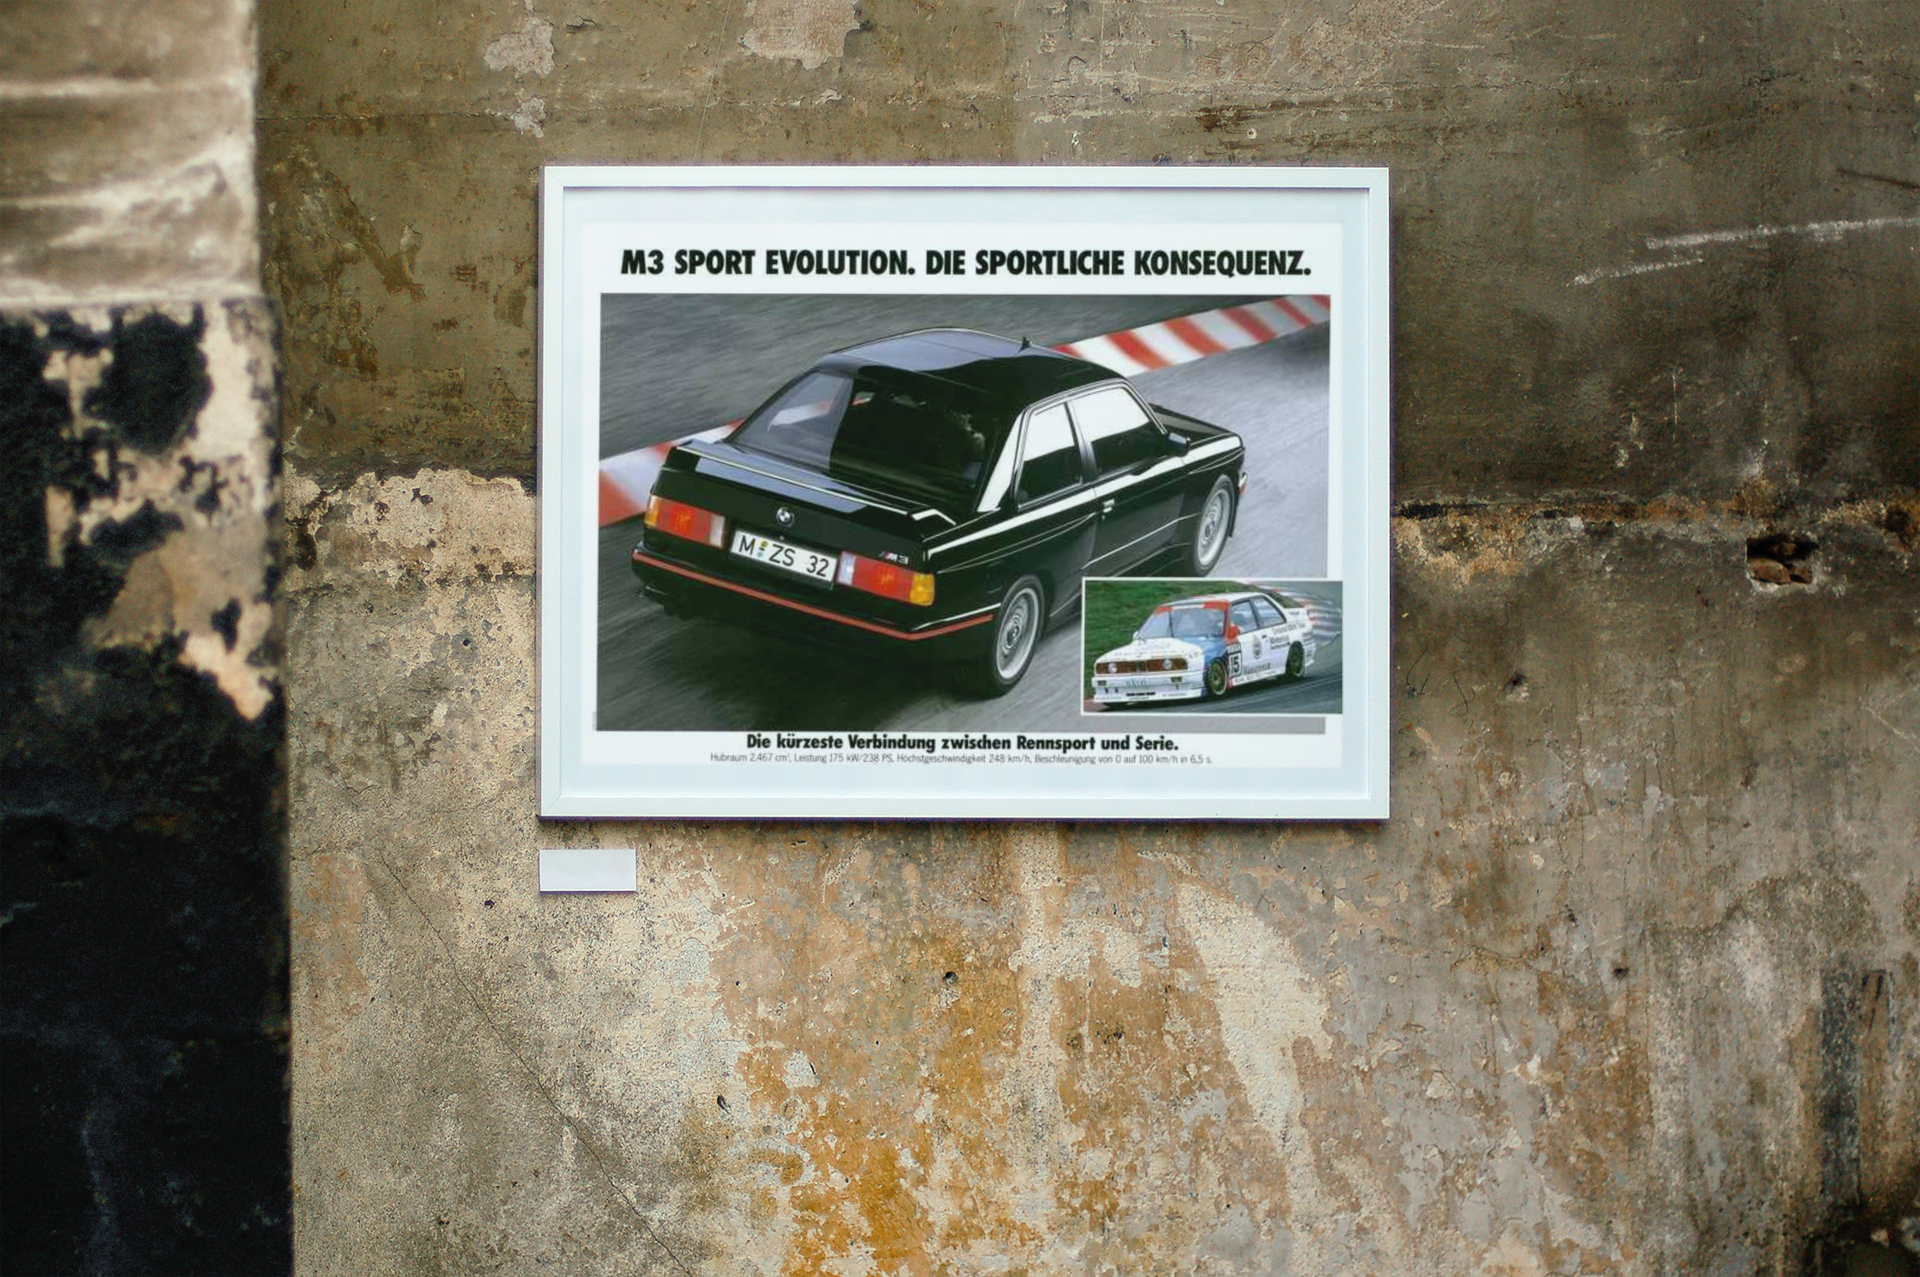 M3 Sport Evolution. The sporting consequence. – Rennsport prints